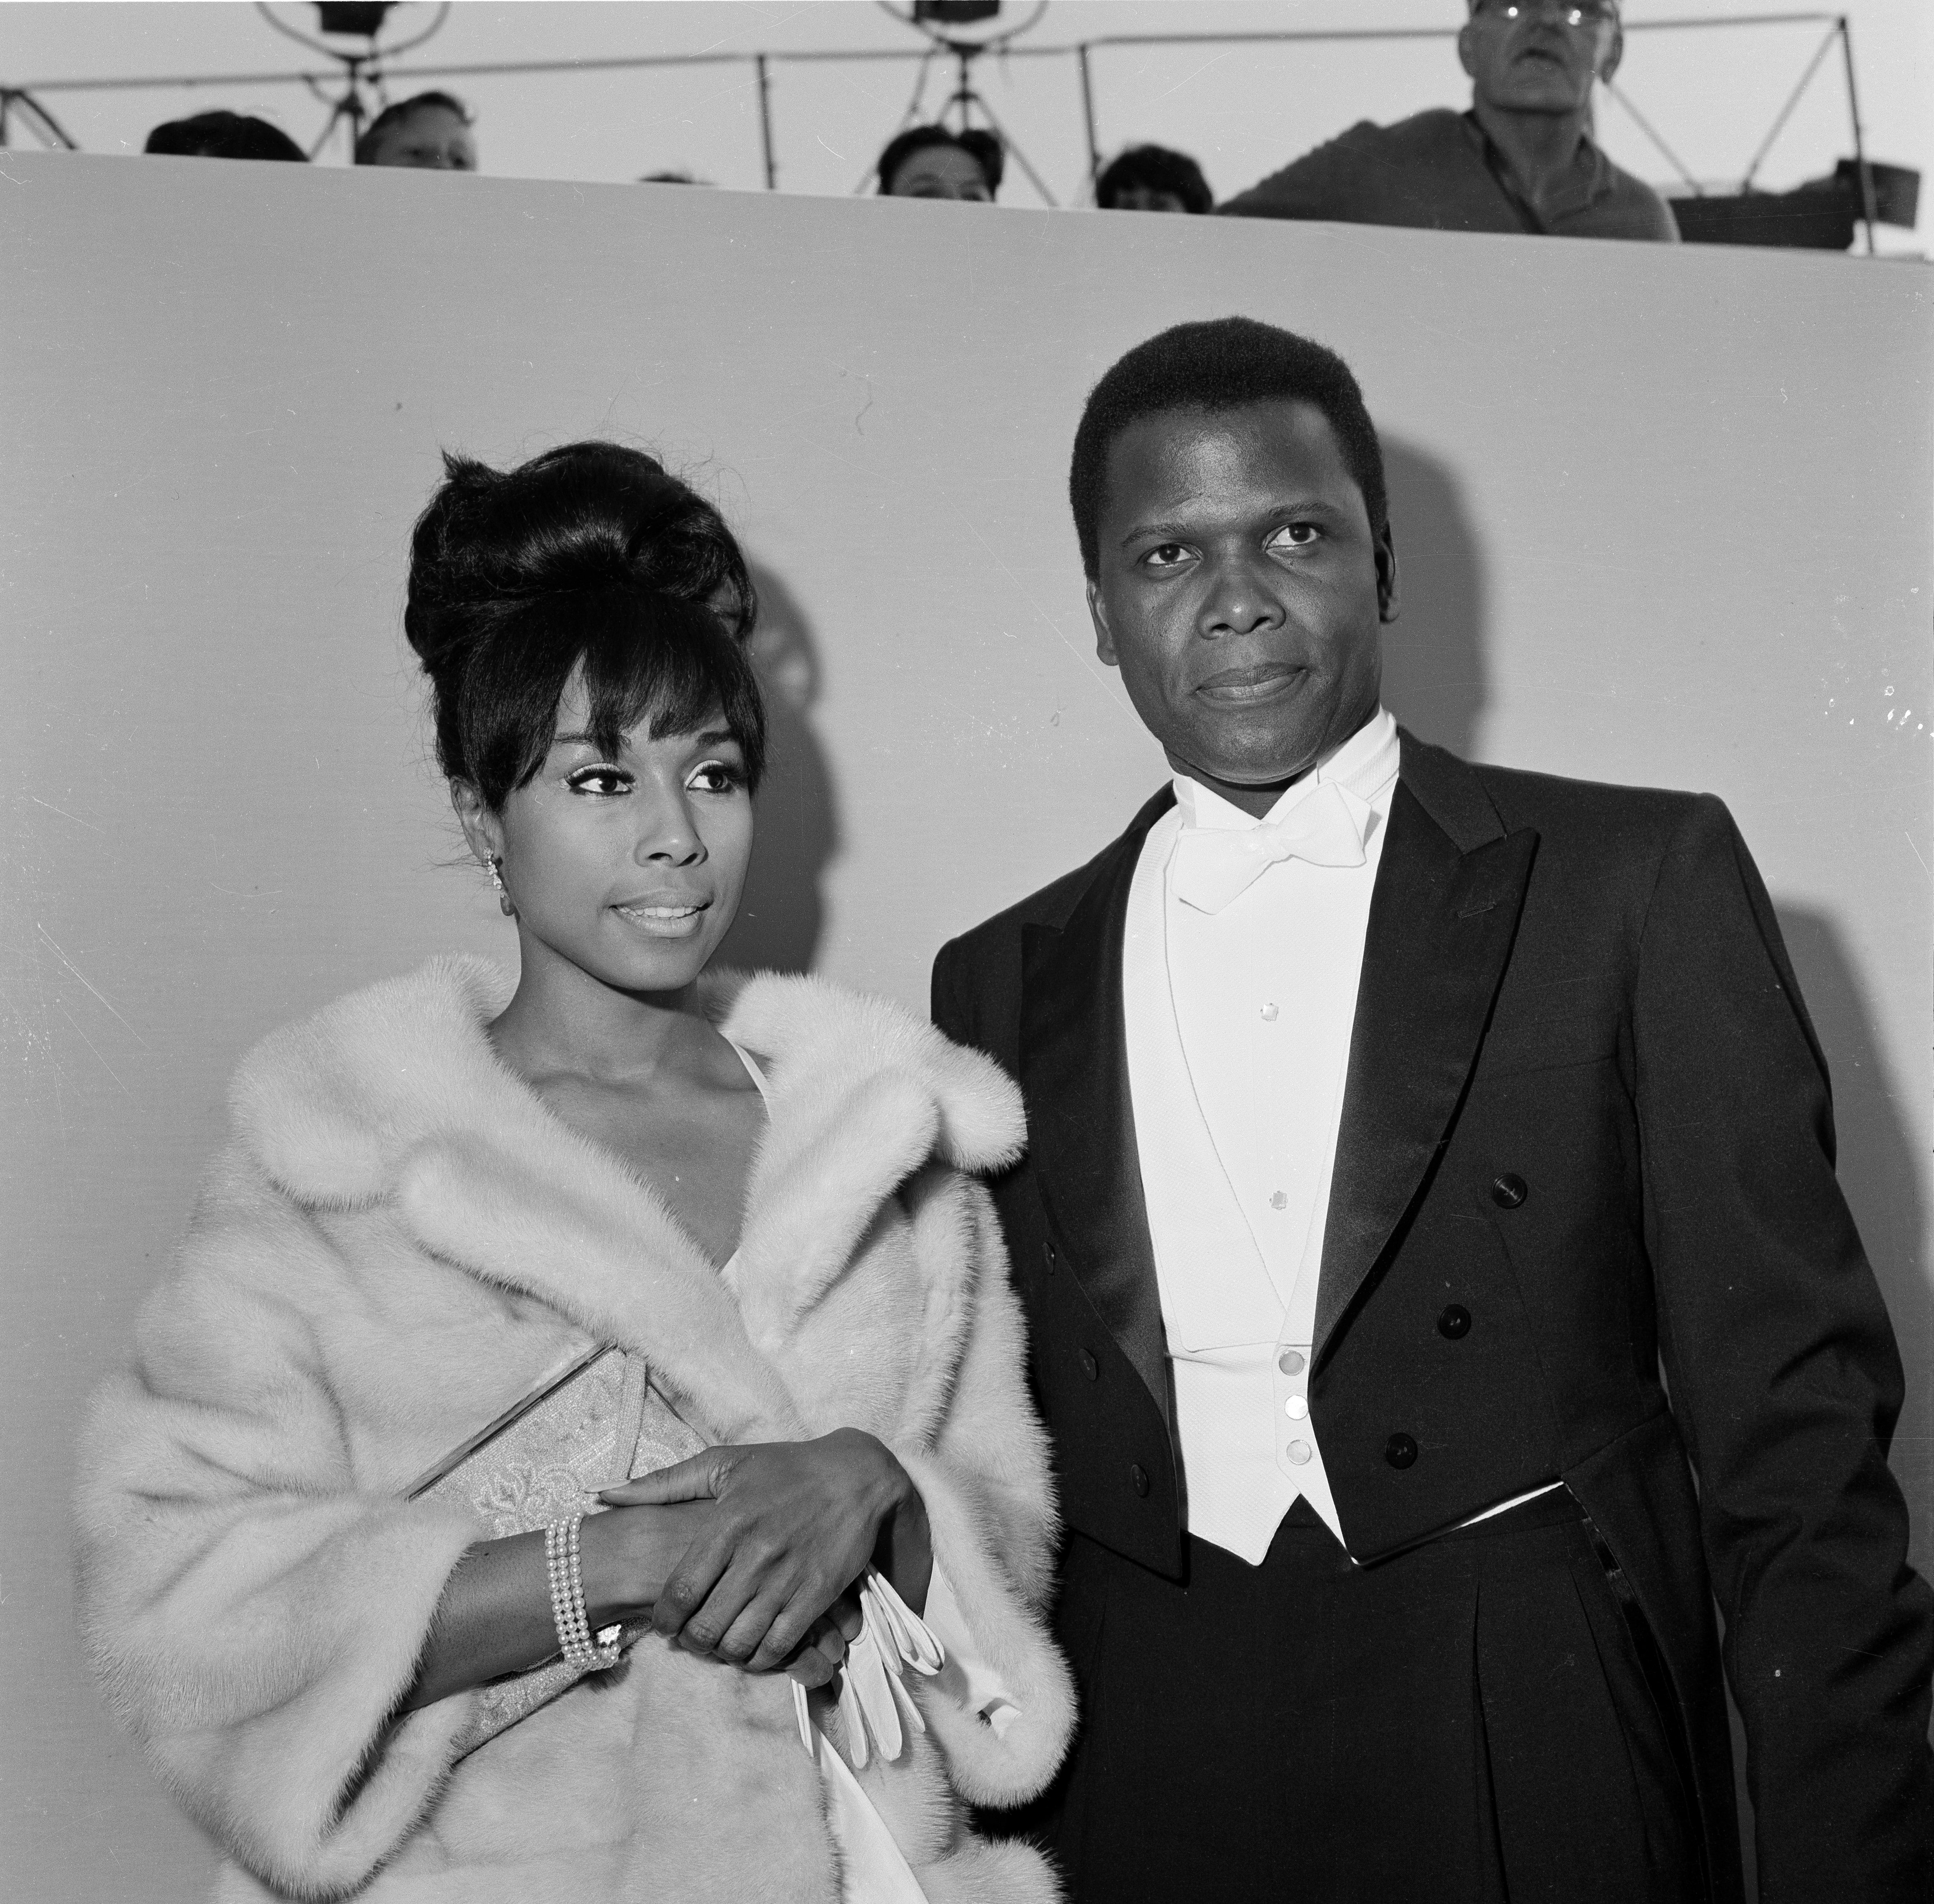 Sidney Poitier and Diahann Carroll at the 36th Academy Awards on April 13, 1964 in Santa Monica, California | Photo: Getty Images